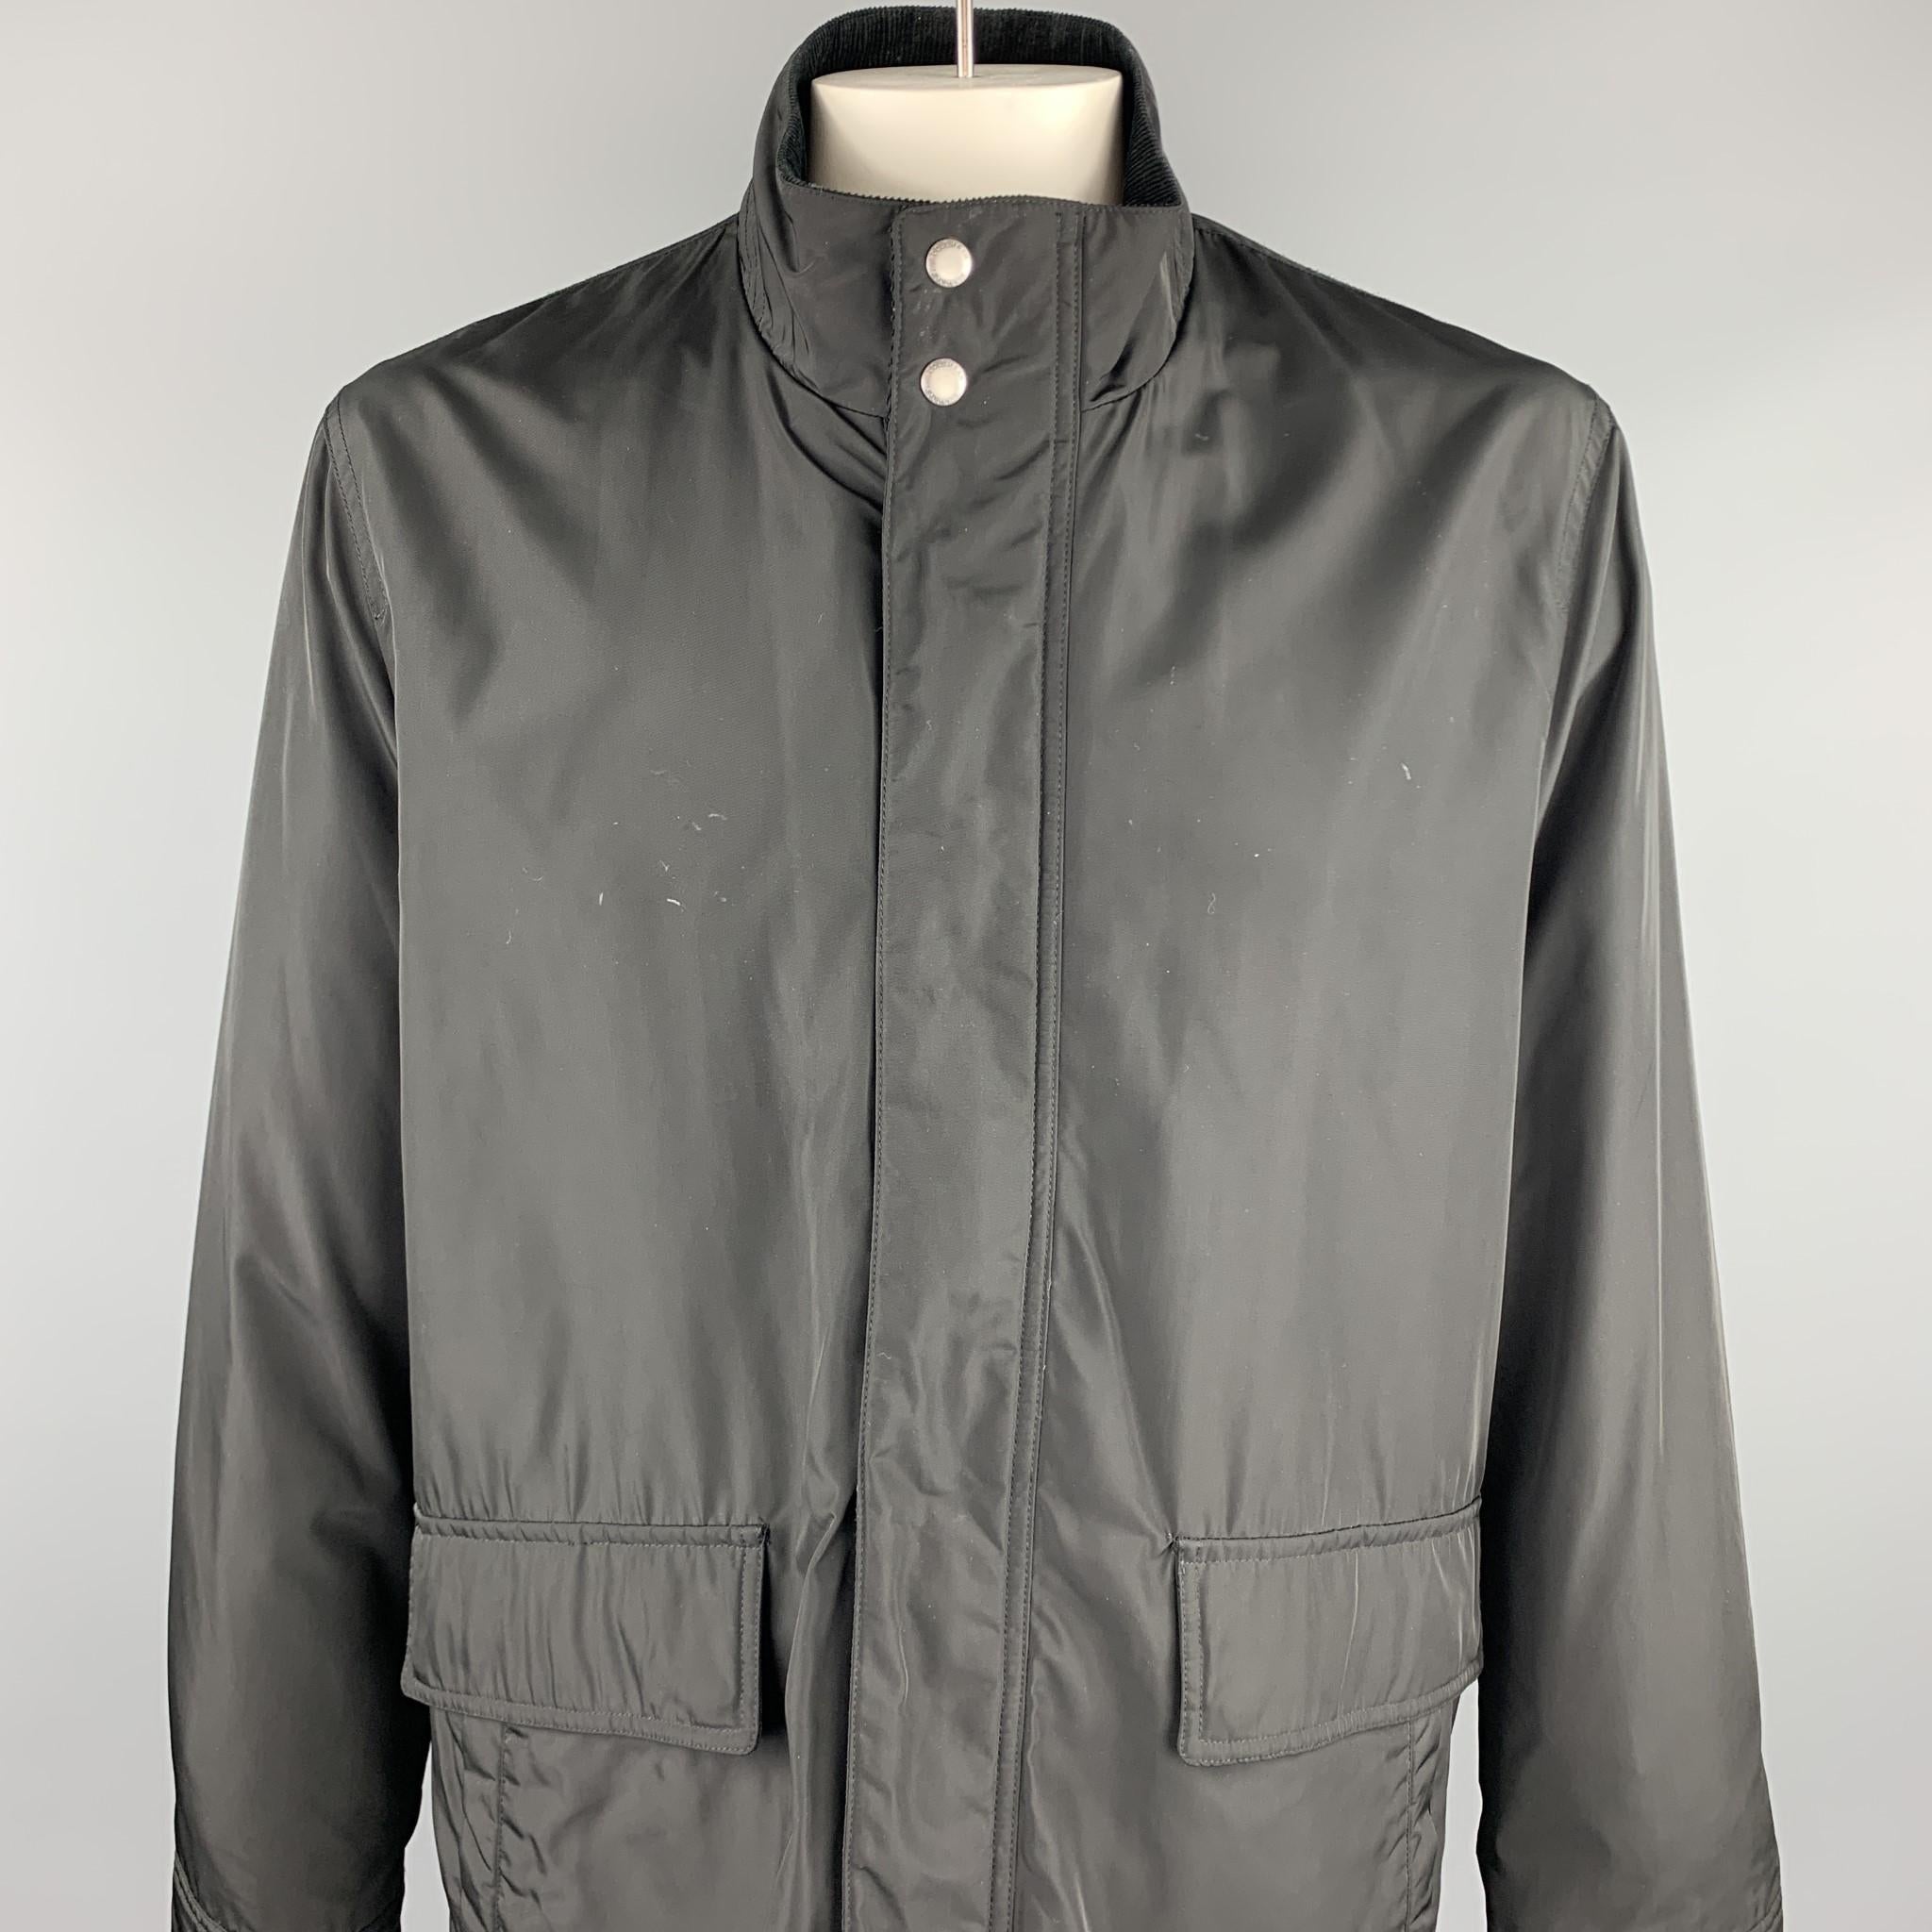 COLE HAAN jacket comes in a black polyester featuring a high collar, corduroy trim, patch pockets, and a zip & snap button closure. Minor marks. As-Is.

Good Pre-Owned Condition.
Marked: L/G

Measurements:

Shoulder: 19 in. 
Chest: 50 in.
Sleeve: 27